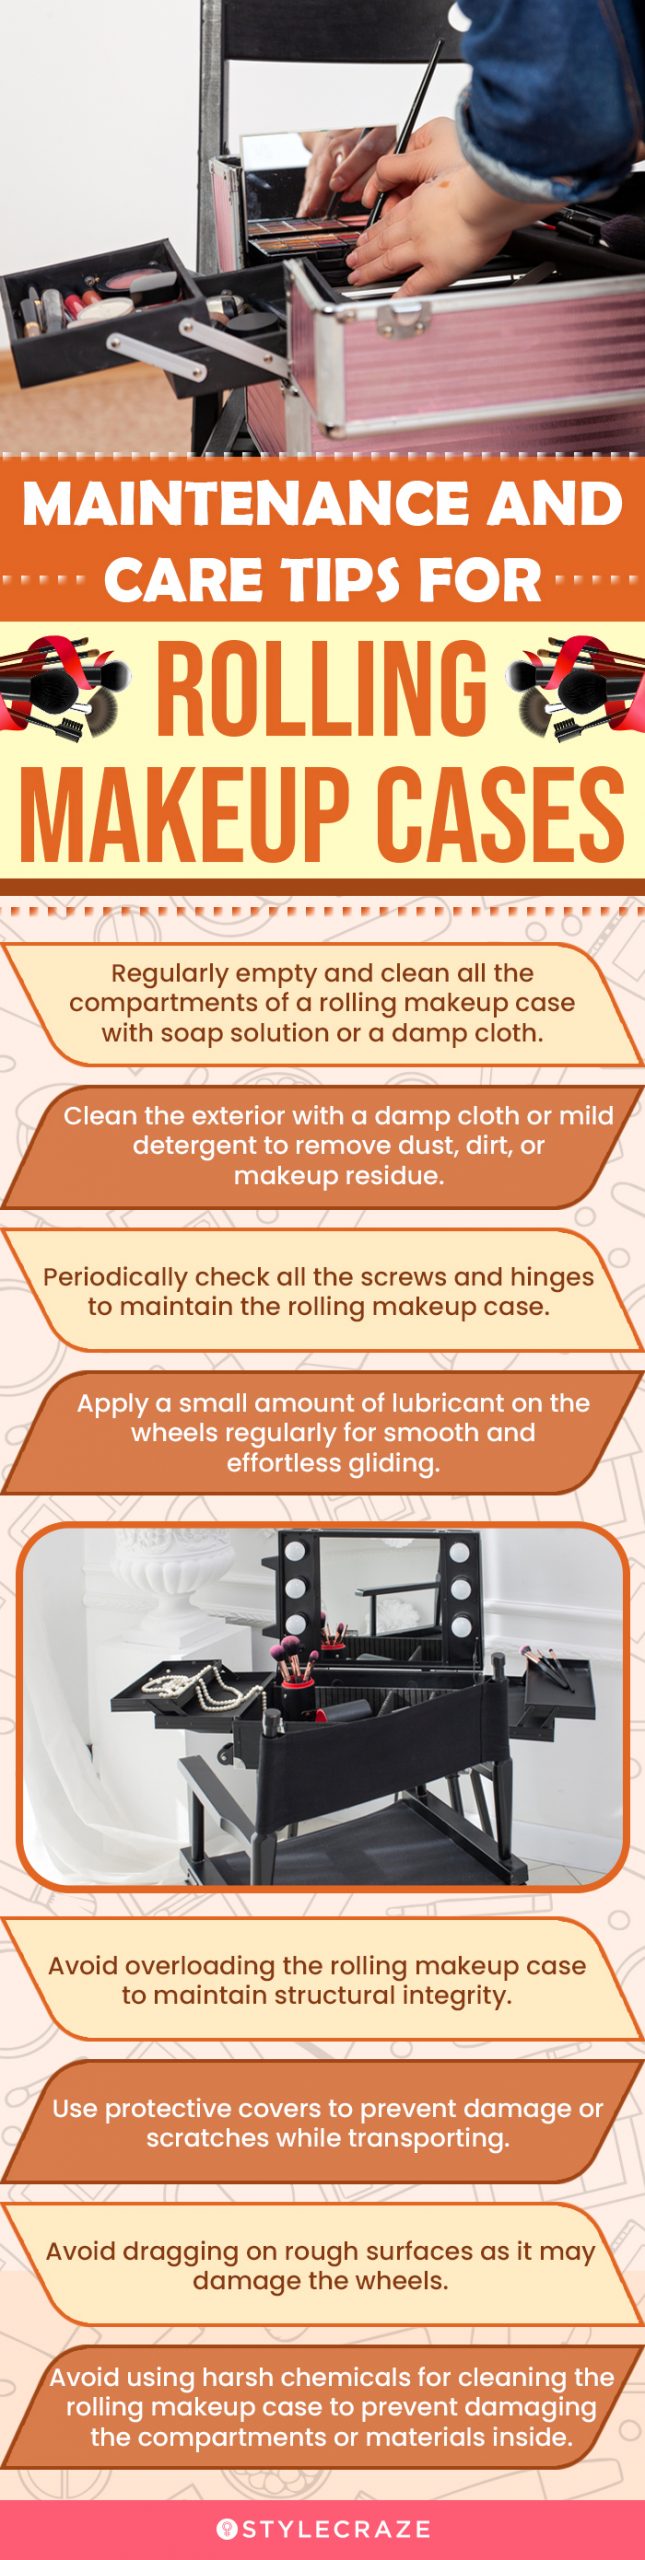 Maintenance And Care Tips For Rolling Makeup Cases (infographic)